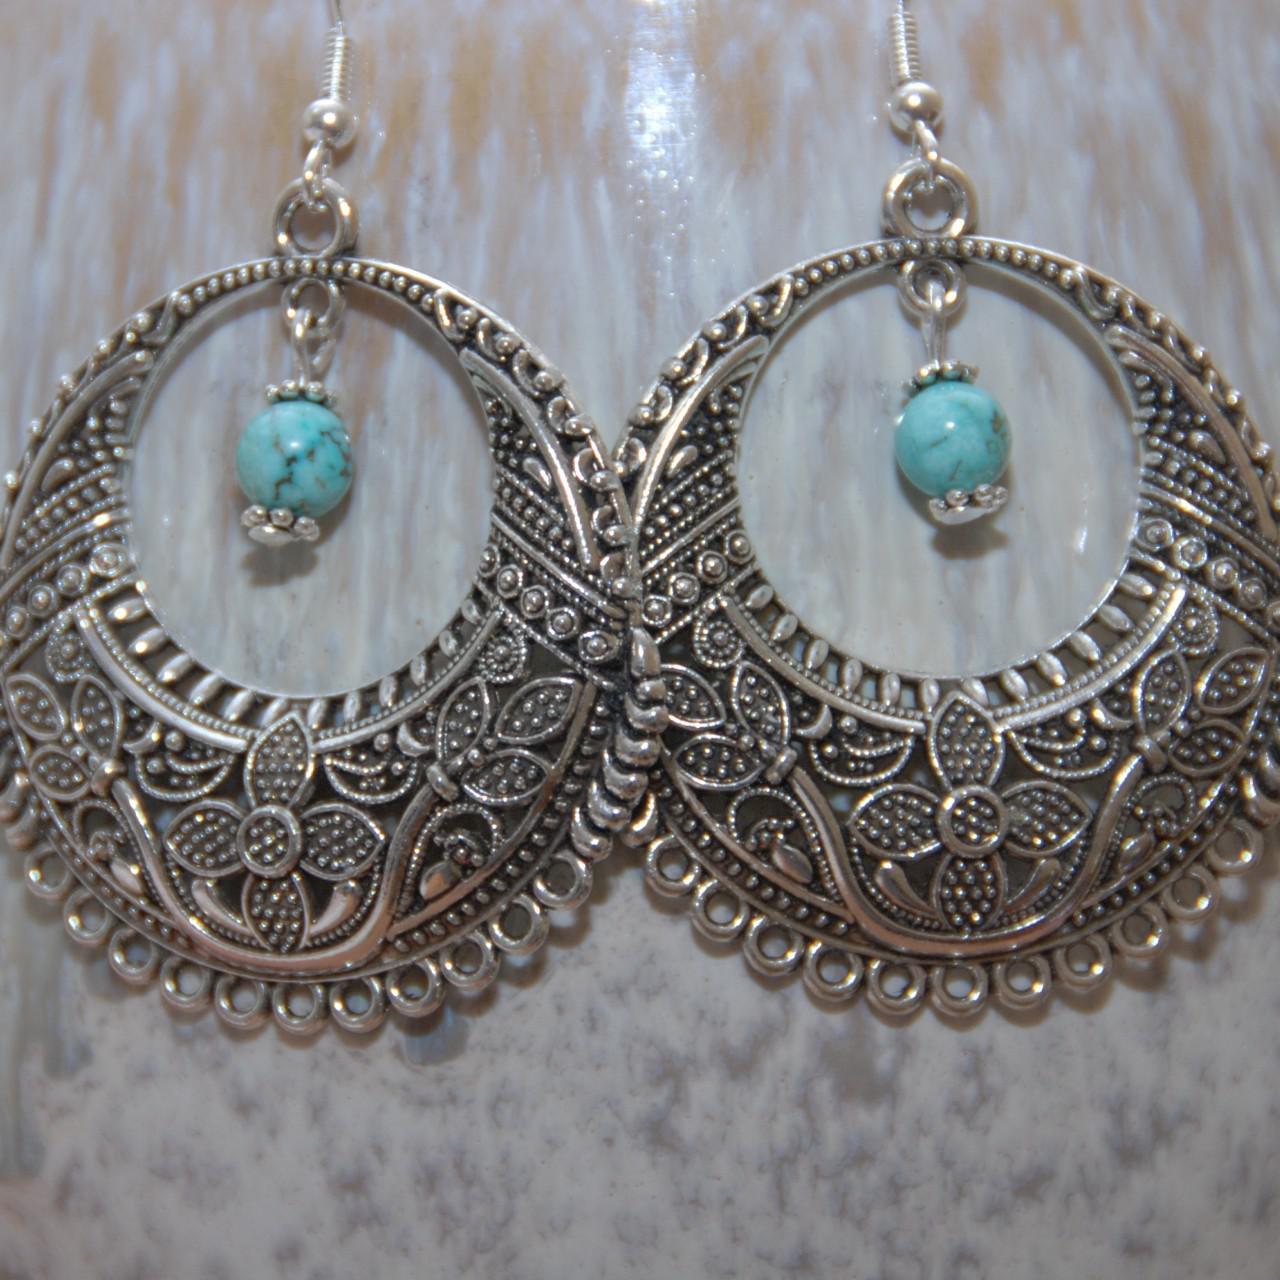 Product Image 2 - Indian Statement Large Earrings 
Turquoise